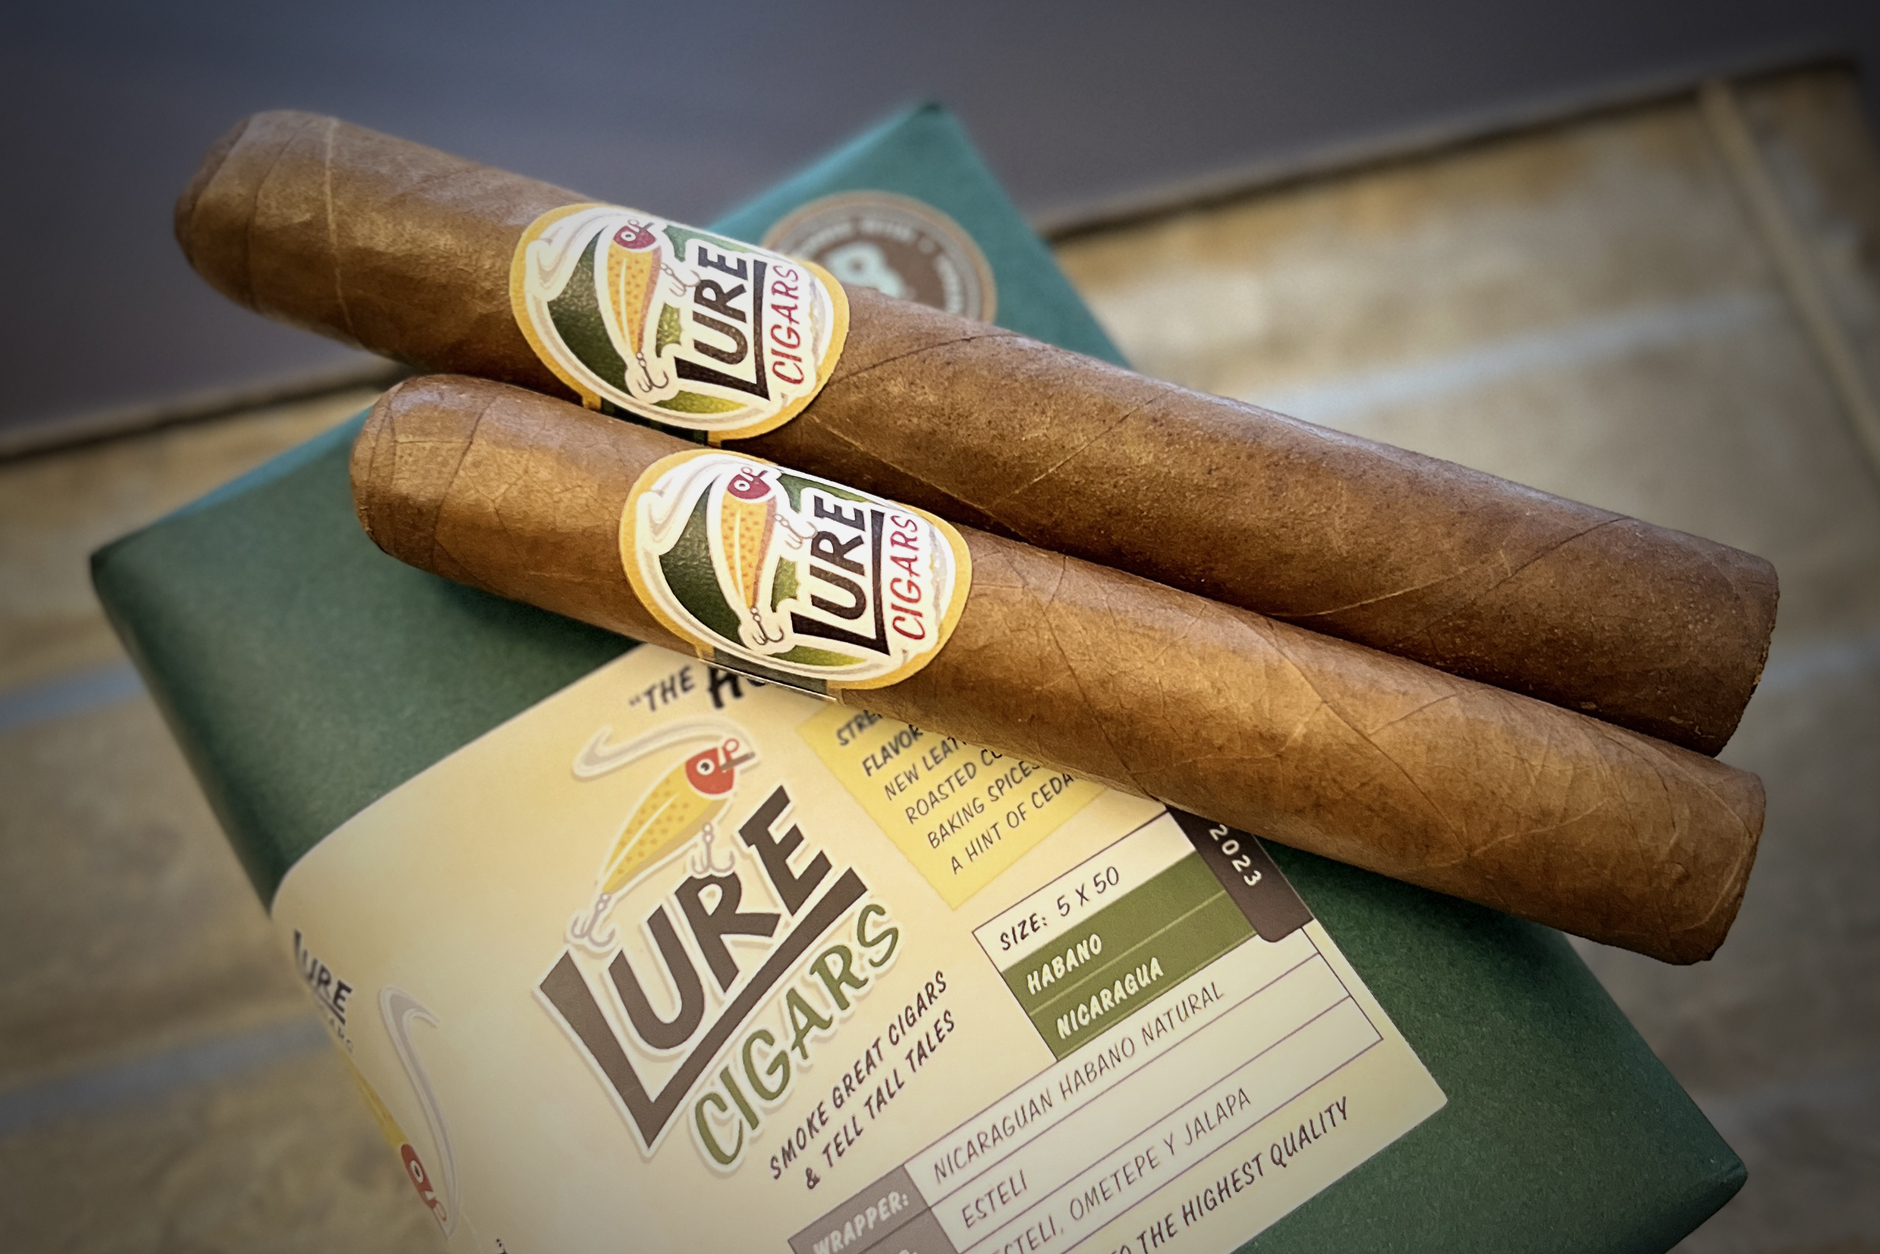 Two Lure cigars propped up on package